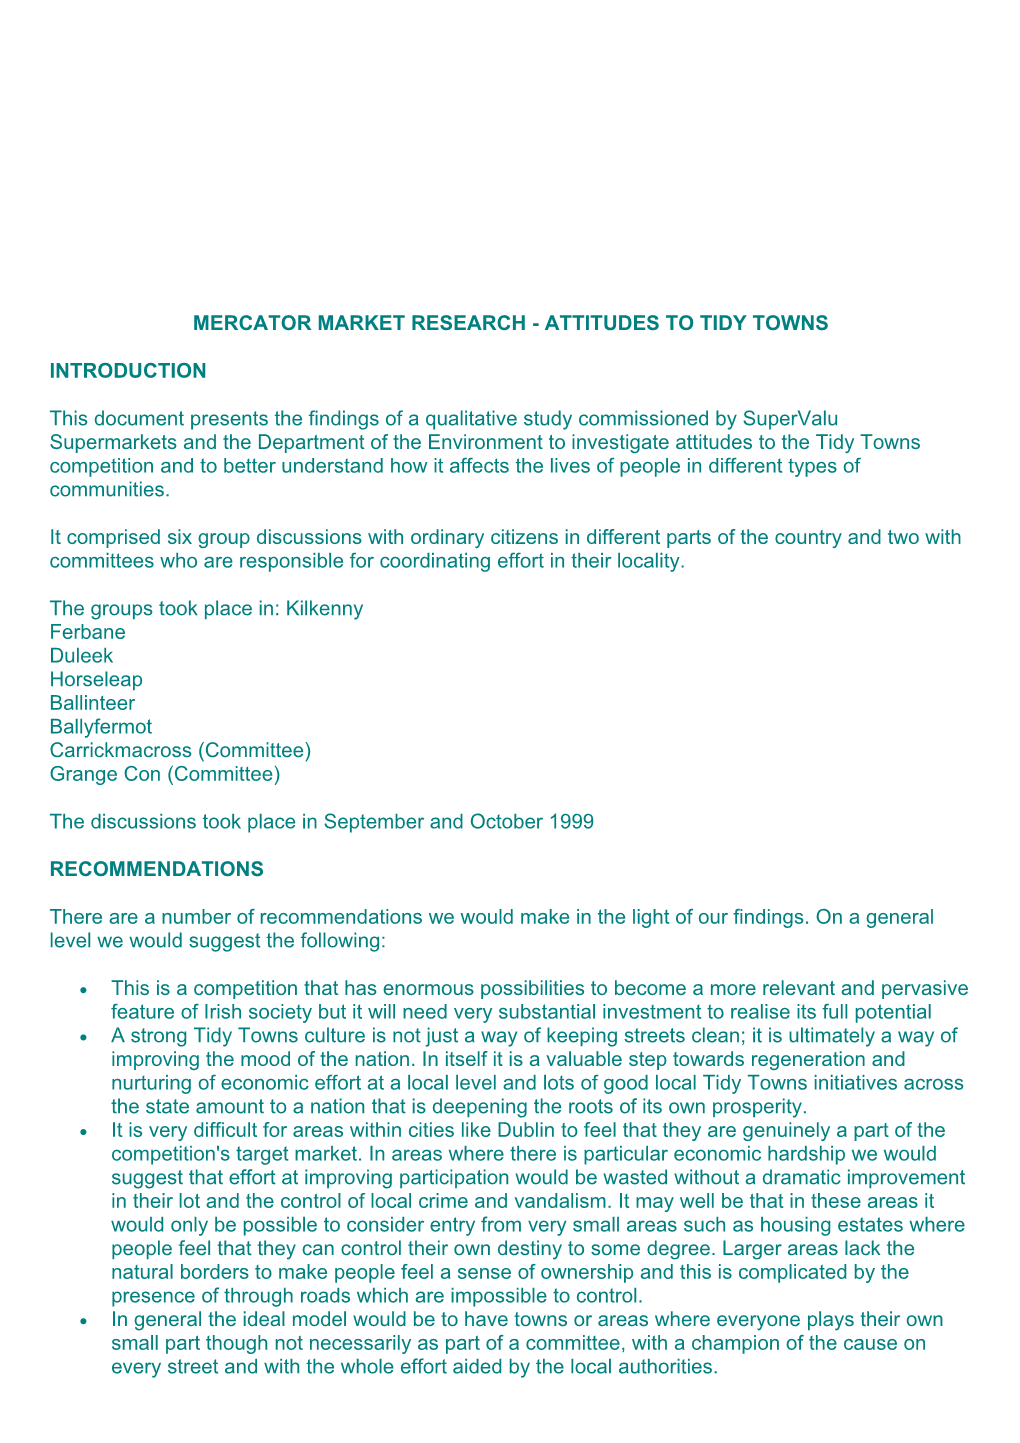 Mercator Market Research - Attitudes to Tidy Towns